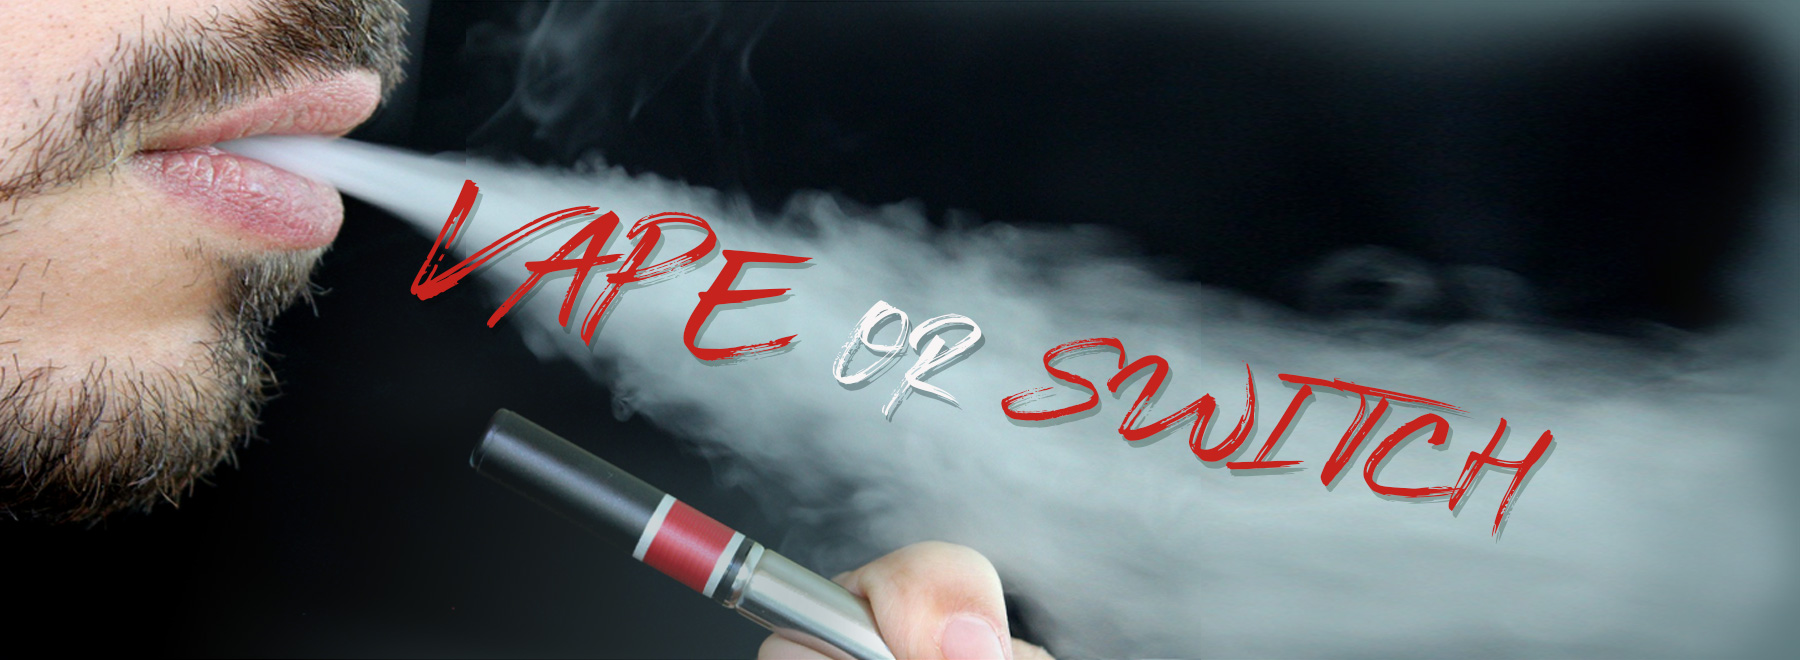 vape and switch title with person vaping and blowing smoke